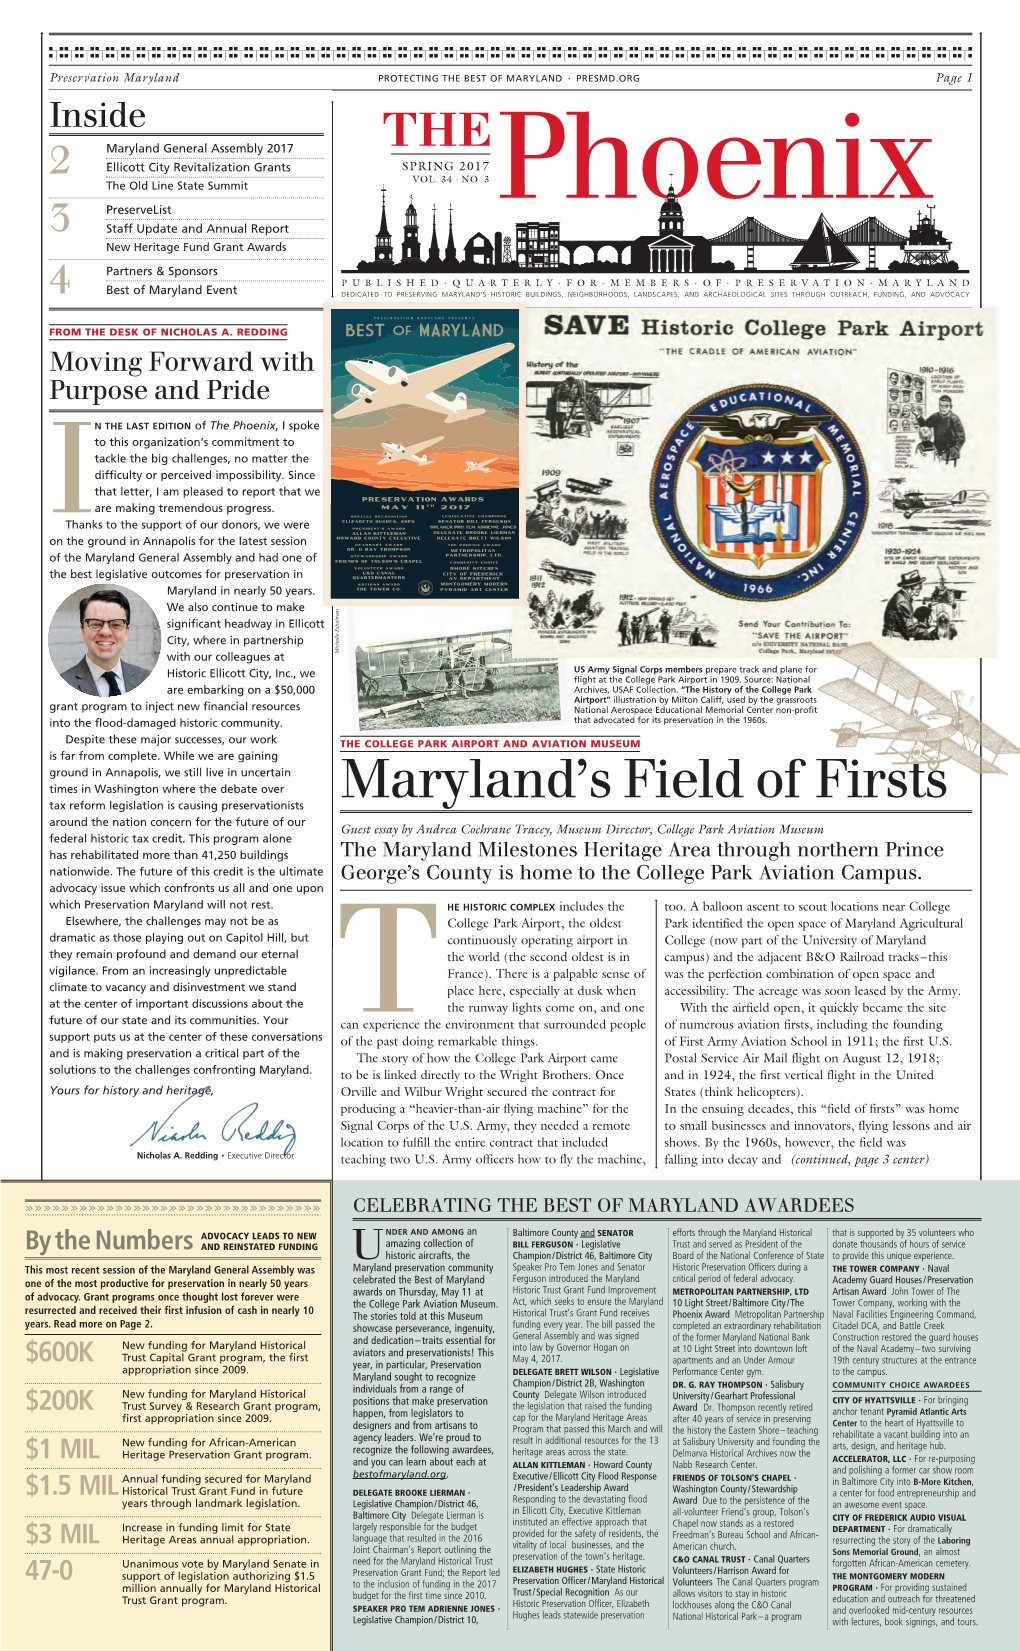 Maryland's Field of Firsts